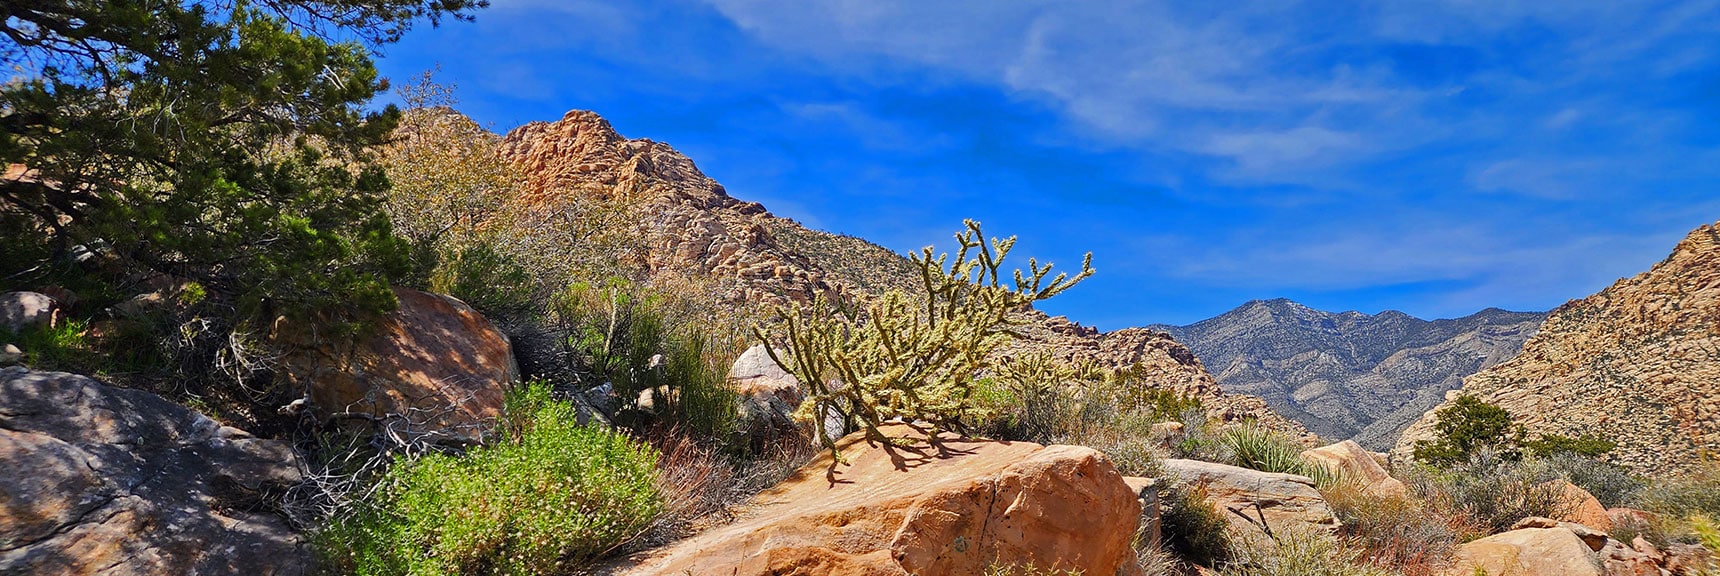 Many Artistic Viewpoints Along the Way if You Take Time to Find Them | Dales Trail | Red Rock Canyon National Conservation Area, Nevada | David Smith | LasVegasAreaTrails.com